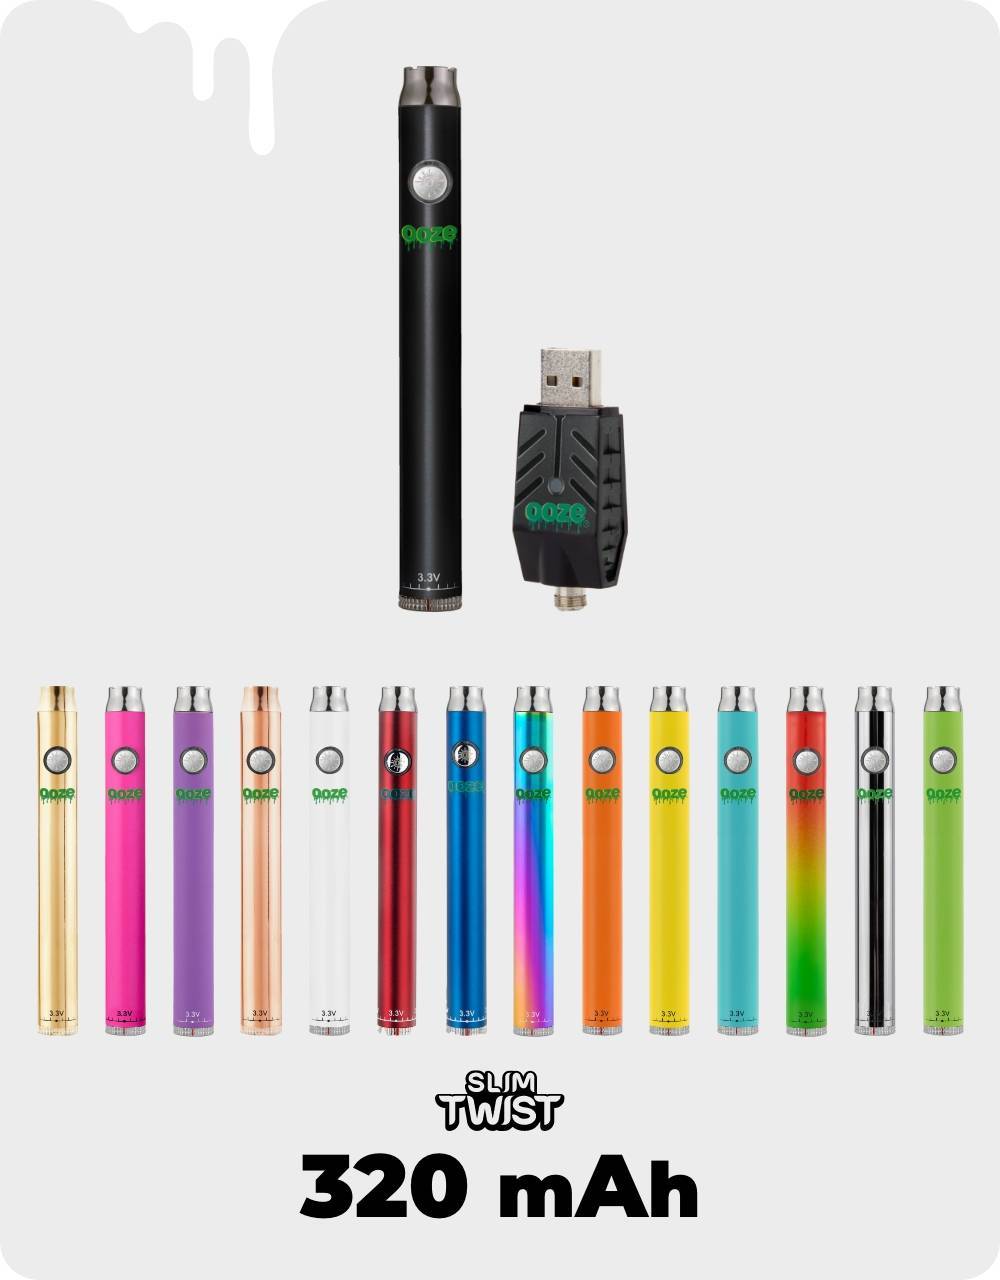 All 15 colors of the Ooze Slim Twist vape pen. The Panter Black pen and charger are shown on top, and the bottom says 320 mAh